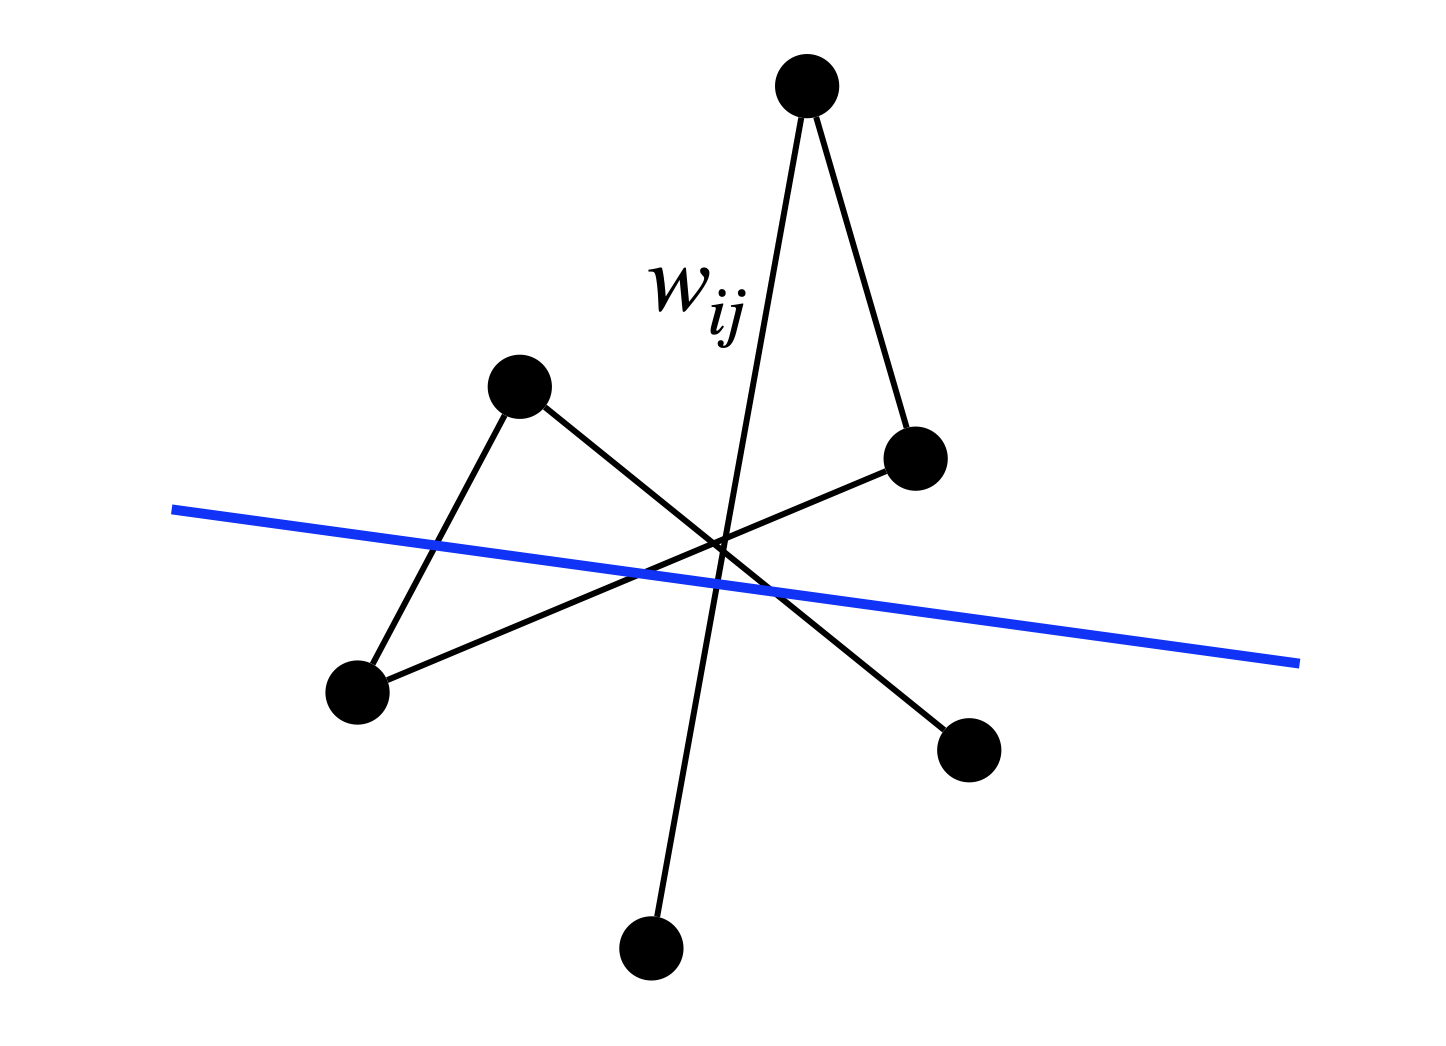 MAXCUT seeks to separate the node set of a graph into two disjoint groups such that the separation line cuts as many (weighted) edges as possible. For example, the blue line cuts four edges.